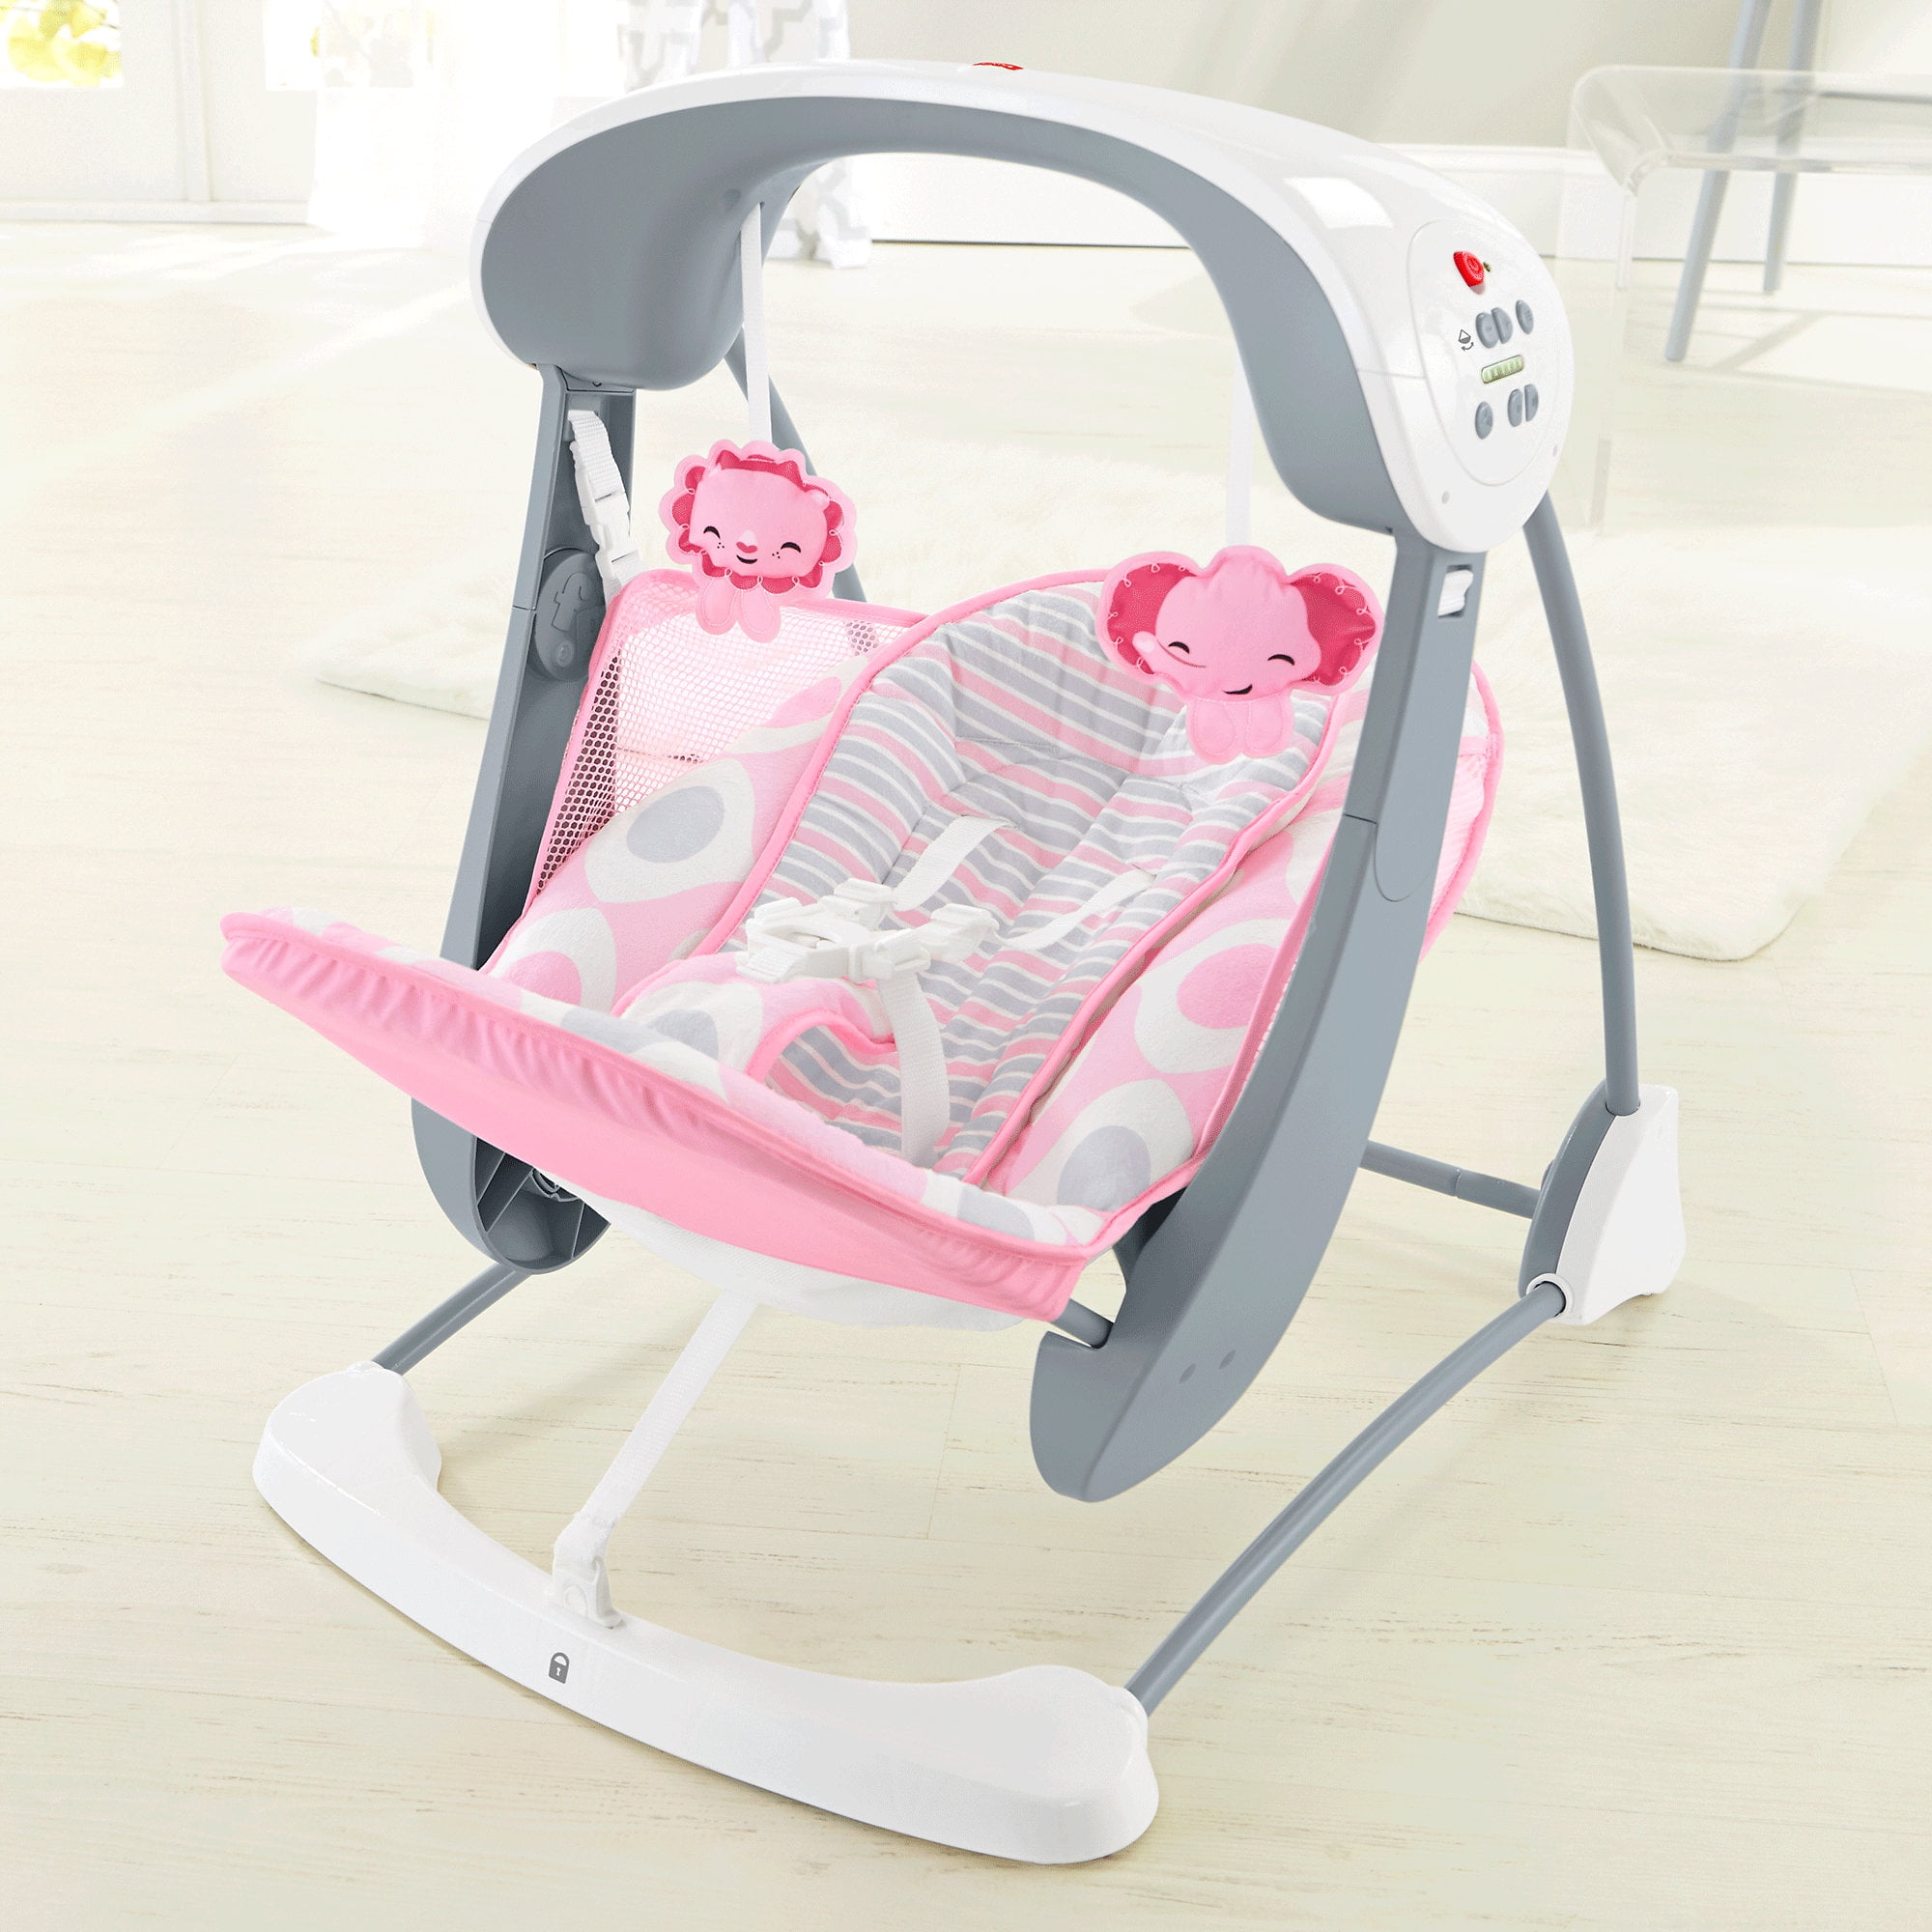 White Deluxe Take-Along Swing and Seat Elephant and Tiger Fisher Price 